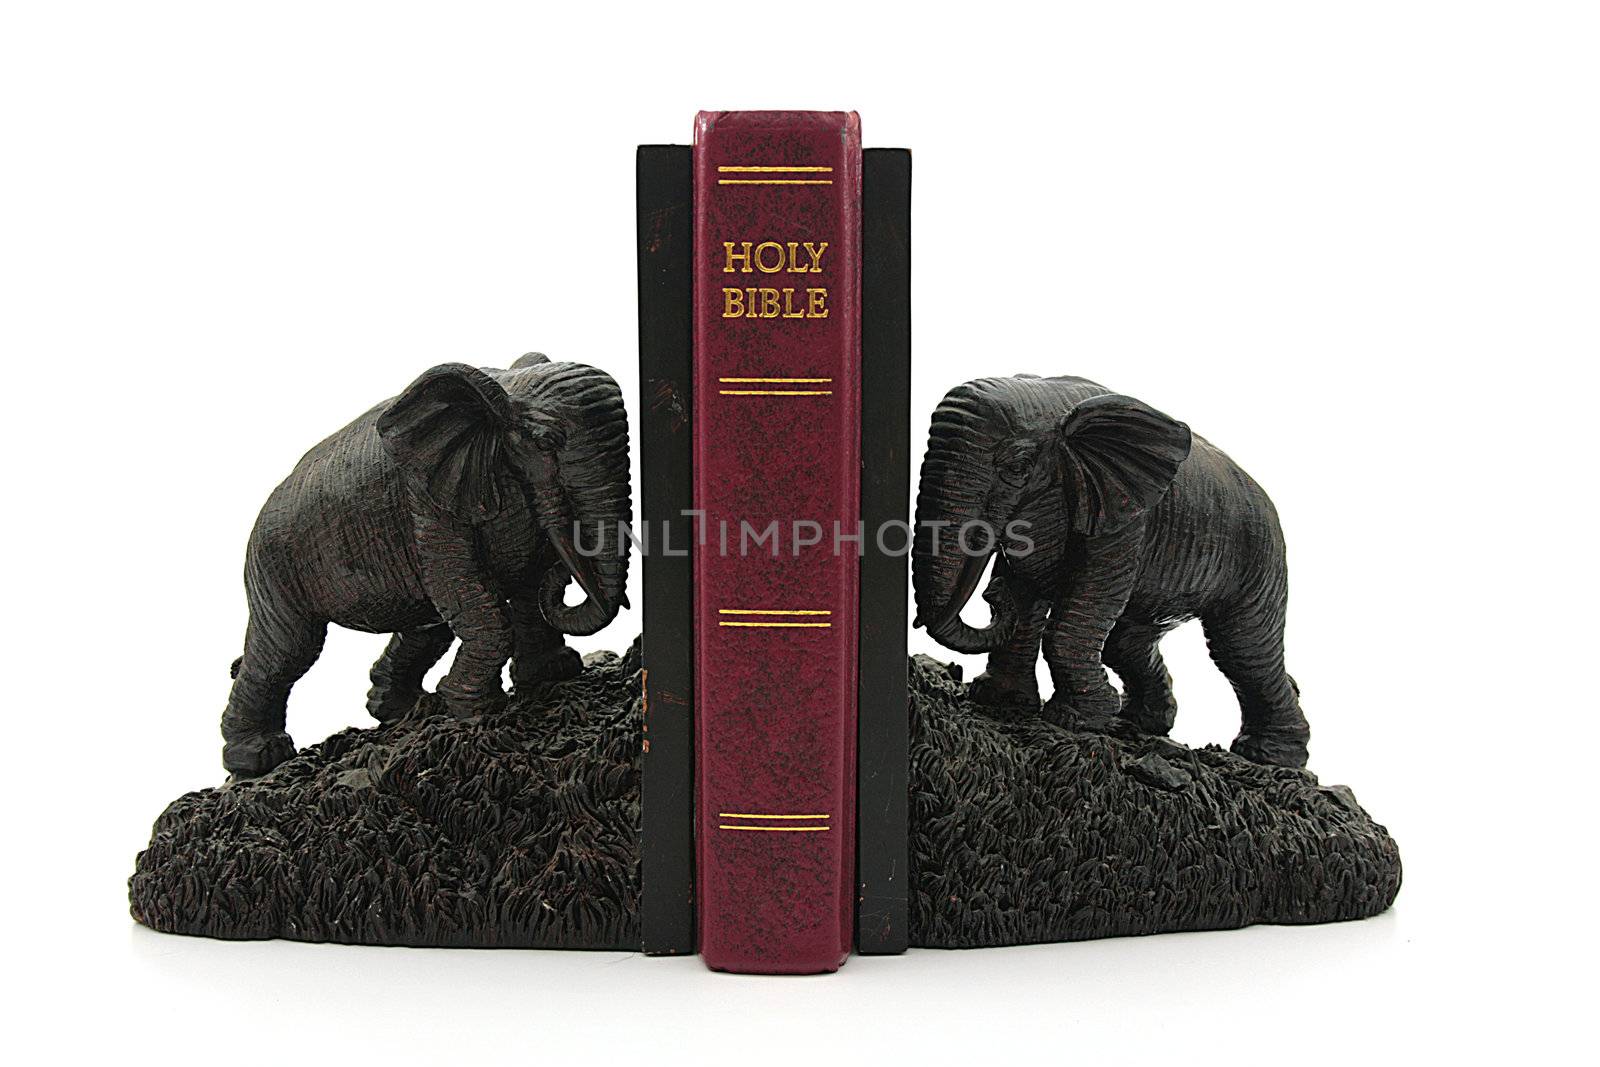 Decorative figurines of elephants support the Bible.